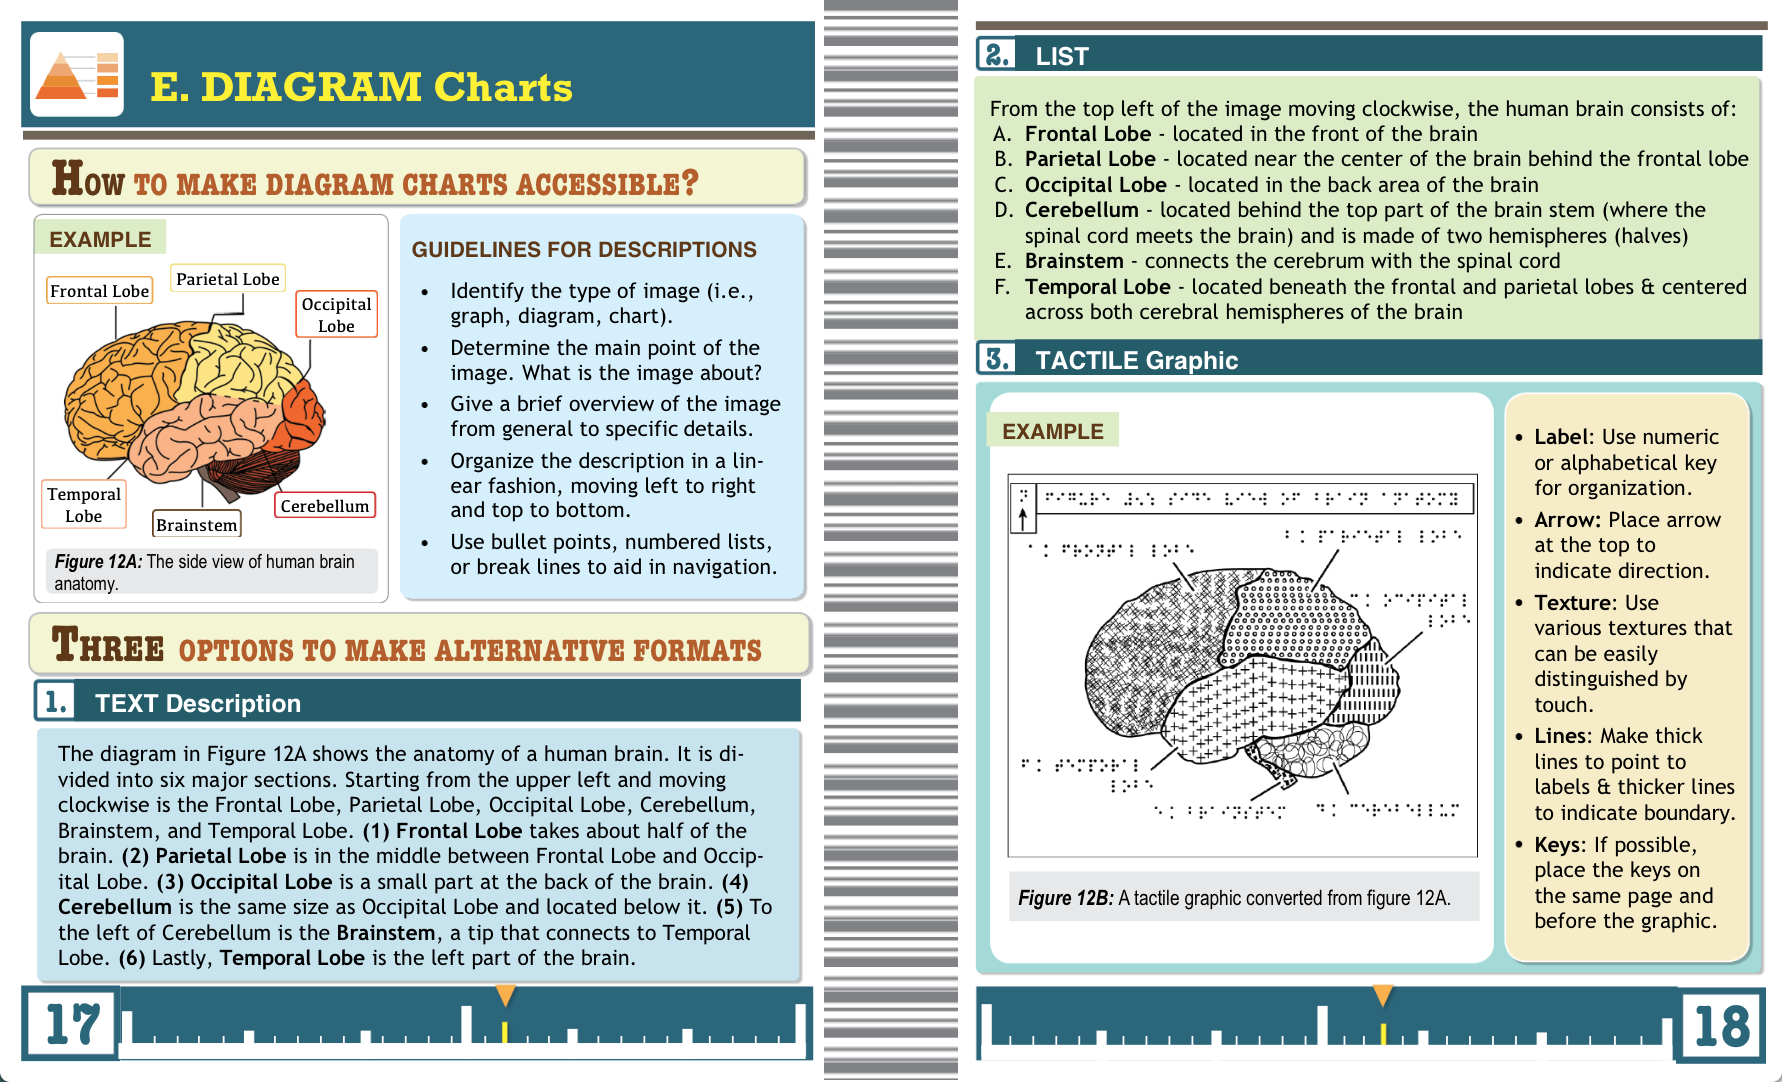 A sample of converting a diagram in 3 different accessible formats, description, lists and tactile graphic.